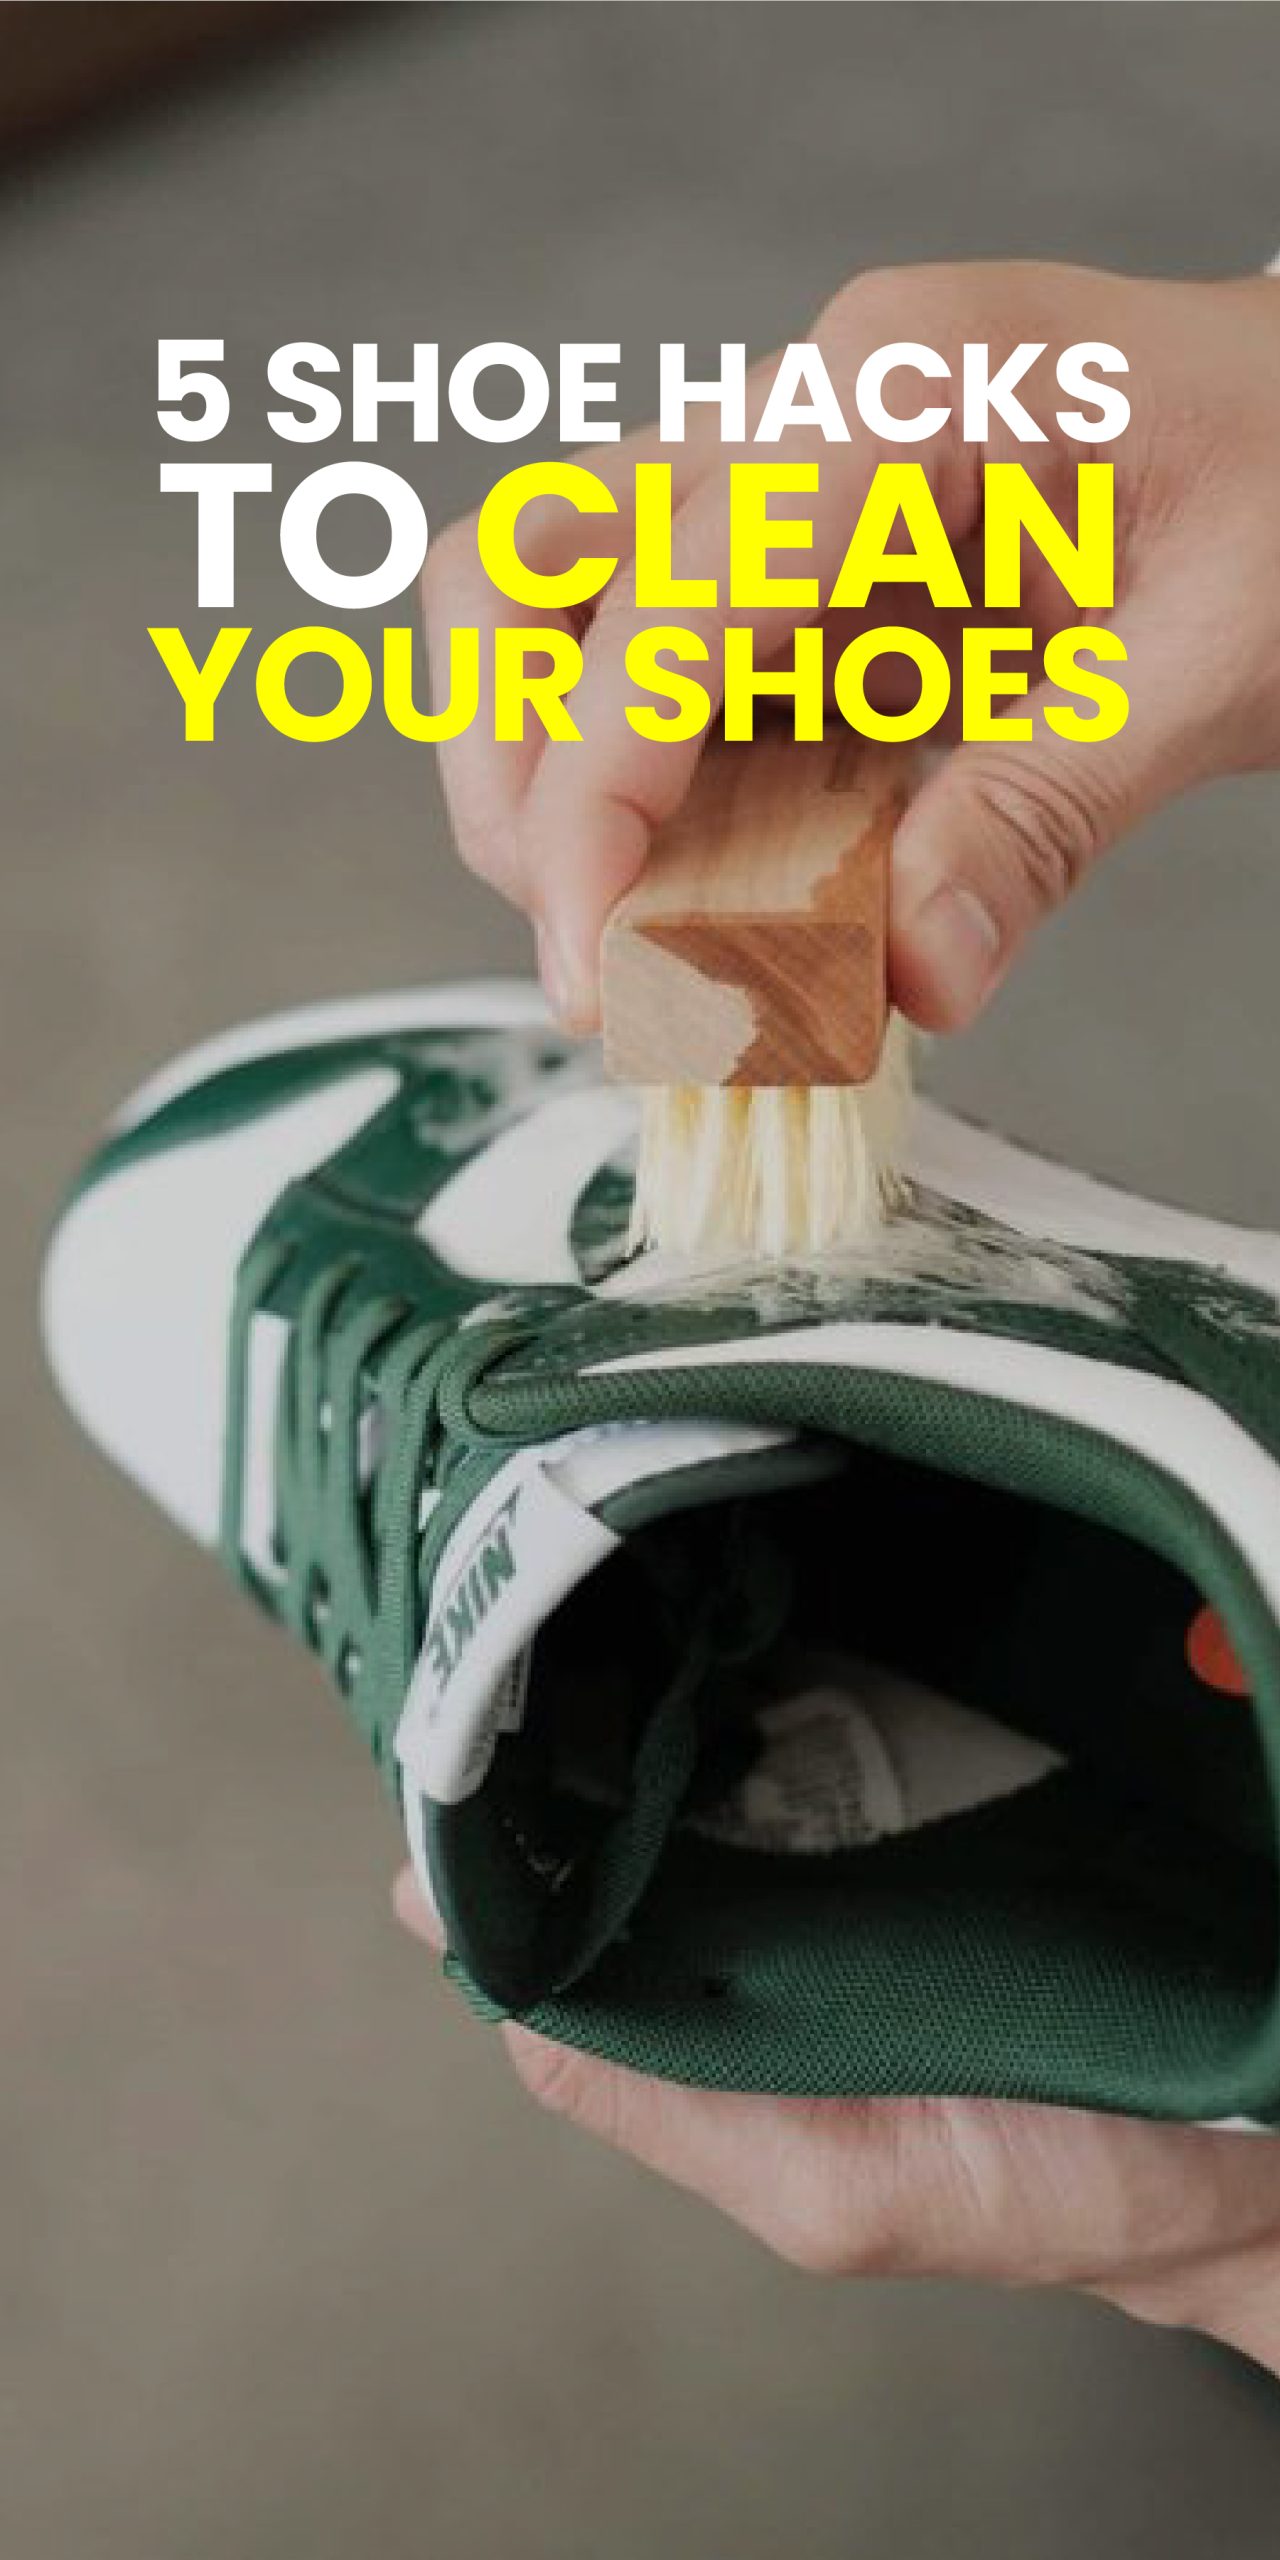 5 SHOE HACKS TO CLEAN YOUR SHOES